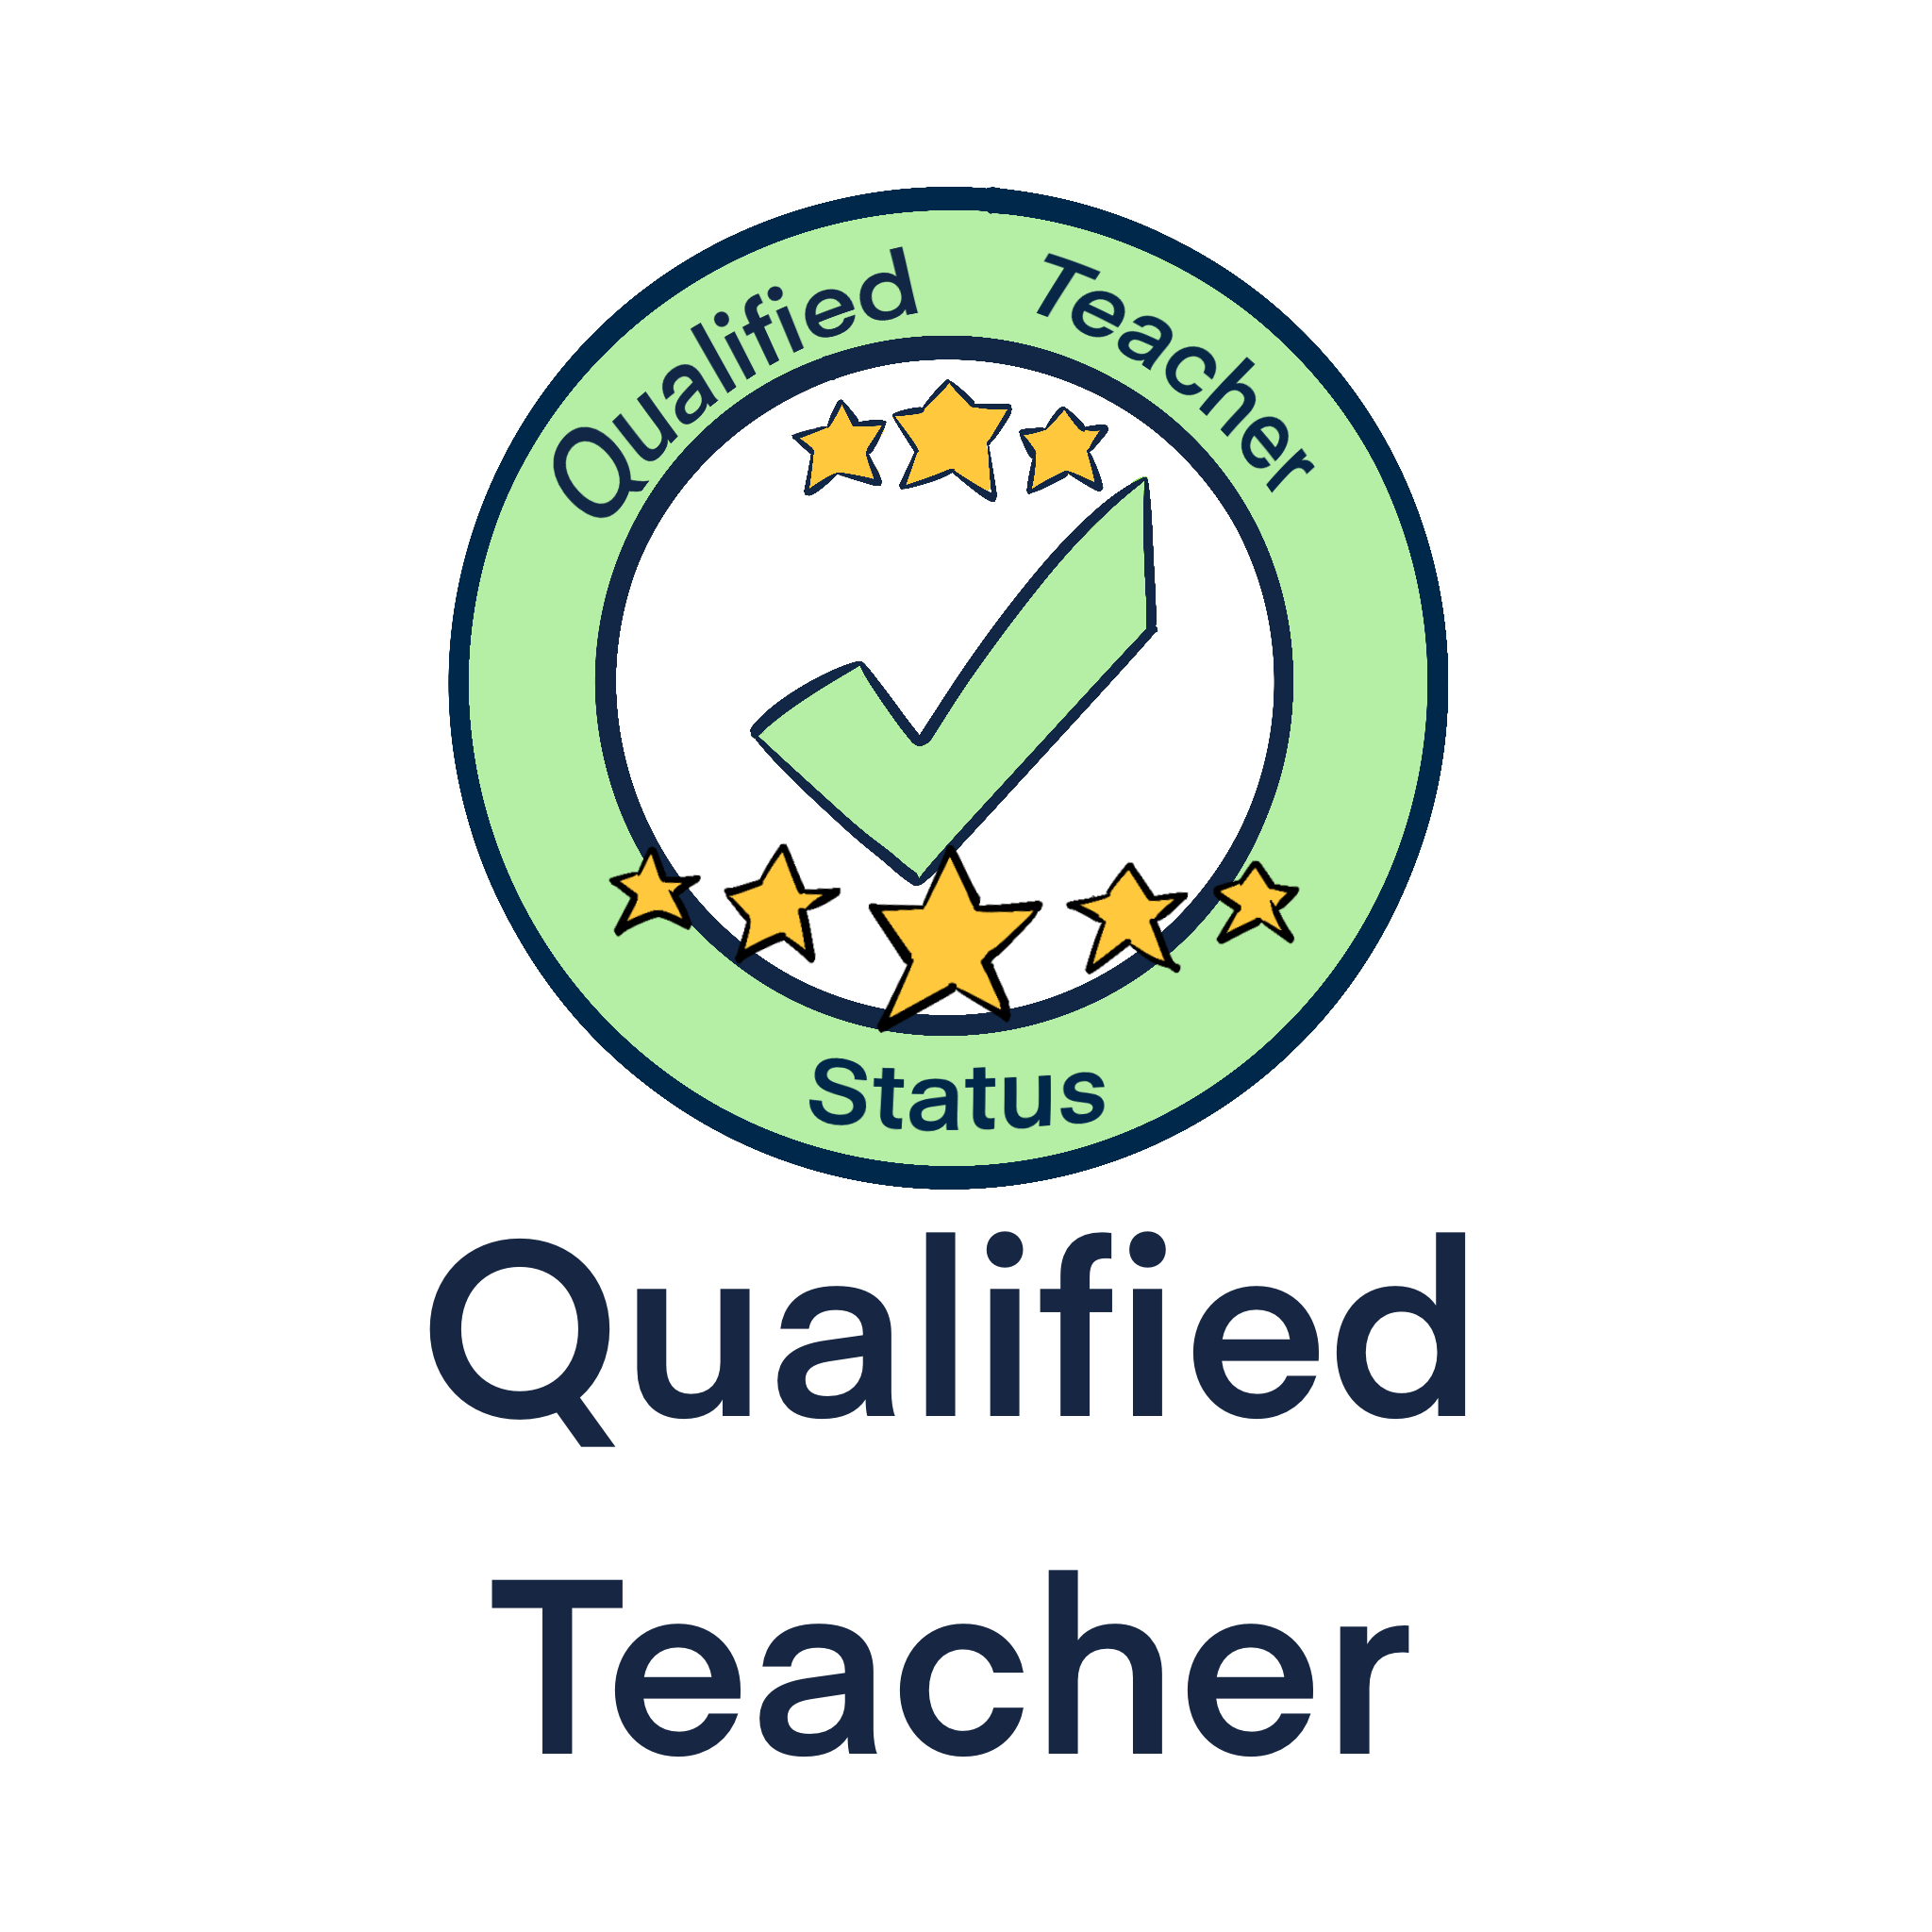 Like all our tutors, Finnian is a qualified teacher